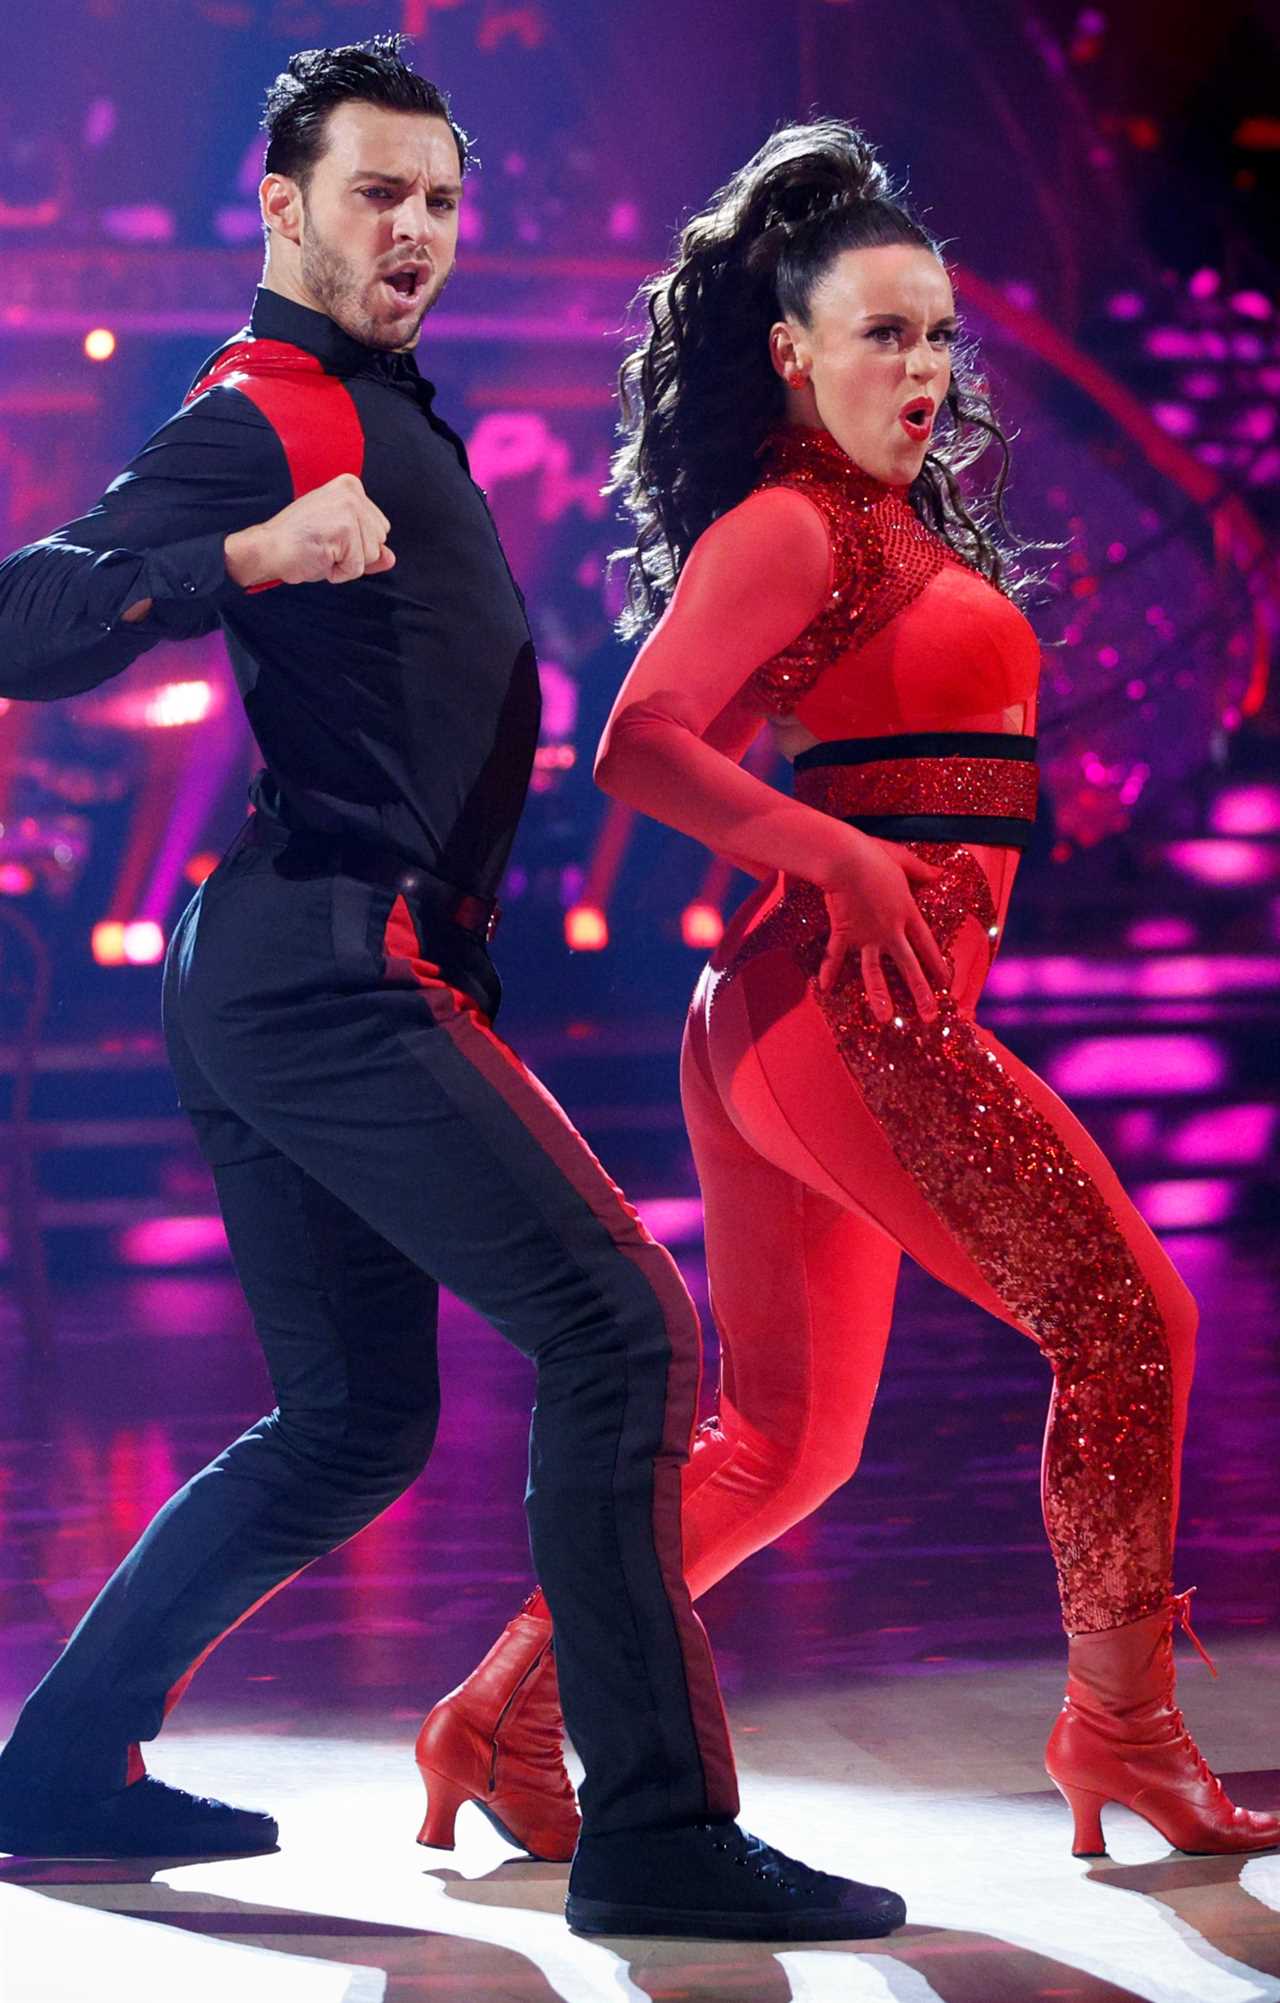 Strictly Come Dancing viewers call for rule change as Shirley Ballas faces backlash